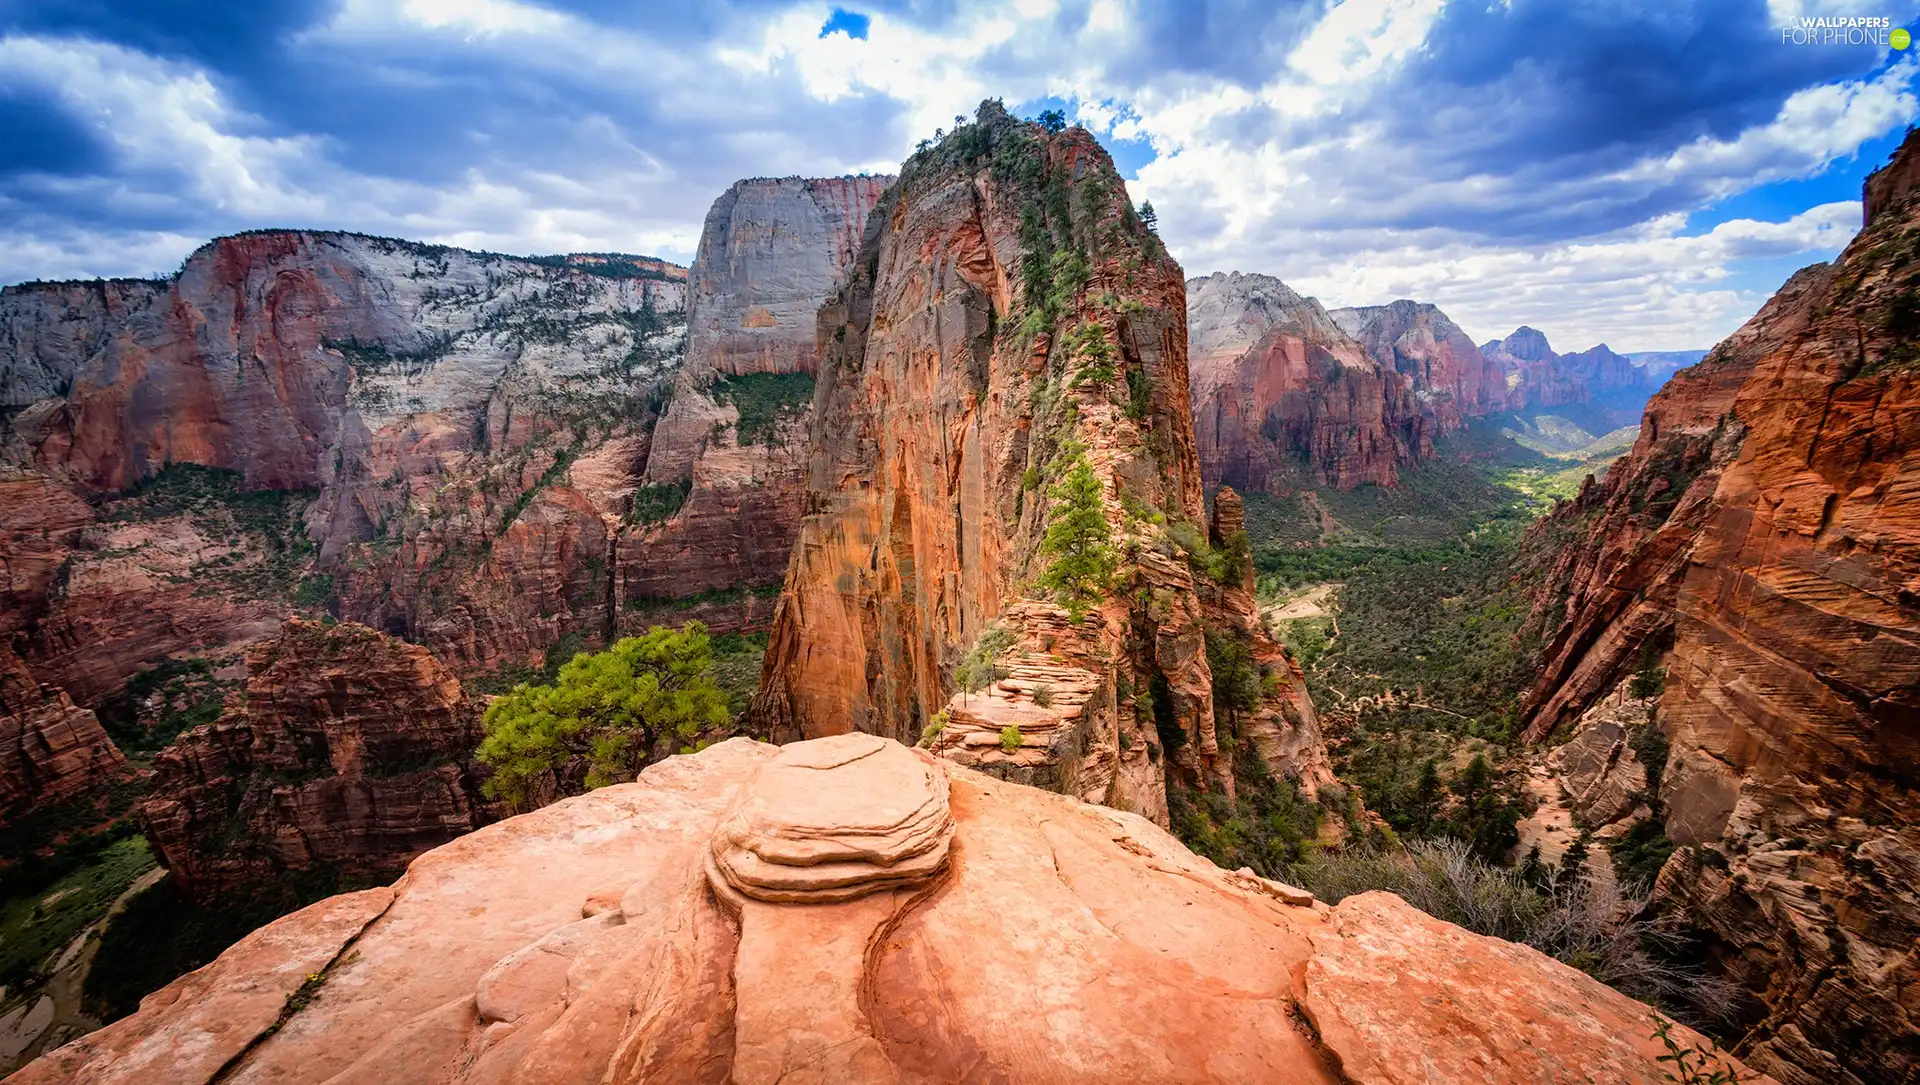 Zion National Park, The United States, canyon, rocks, Angels Landing, Utah State